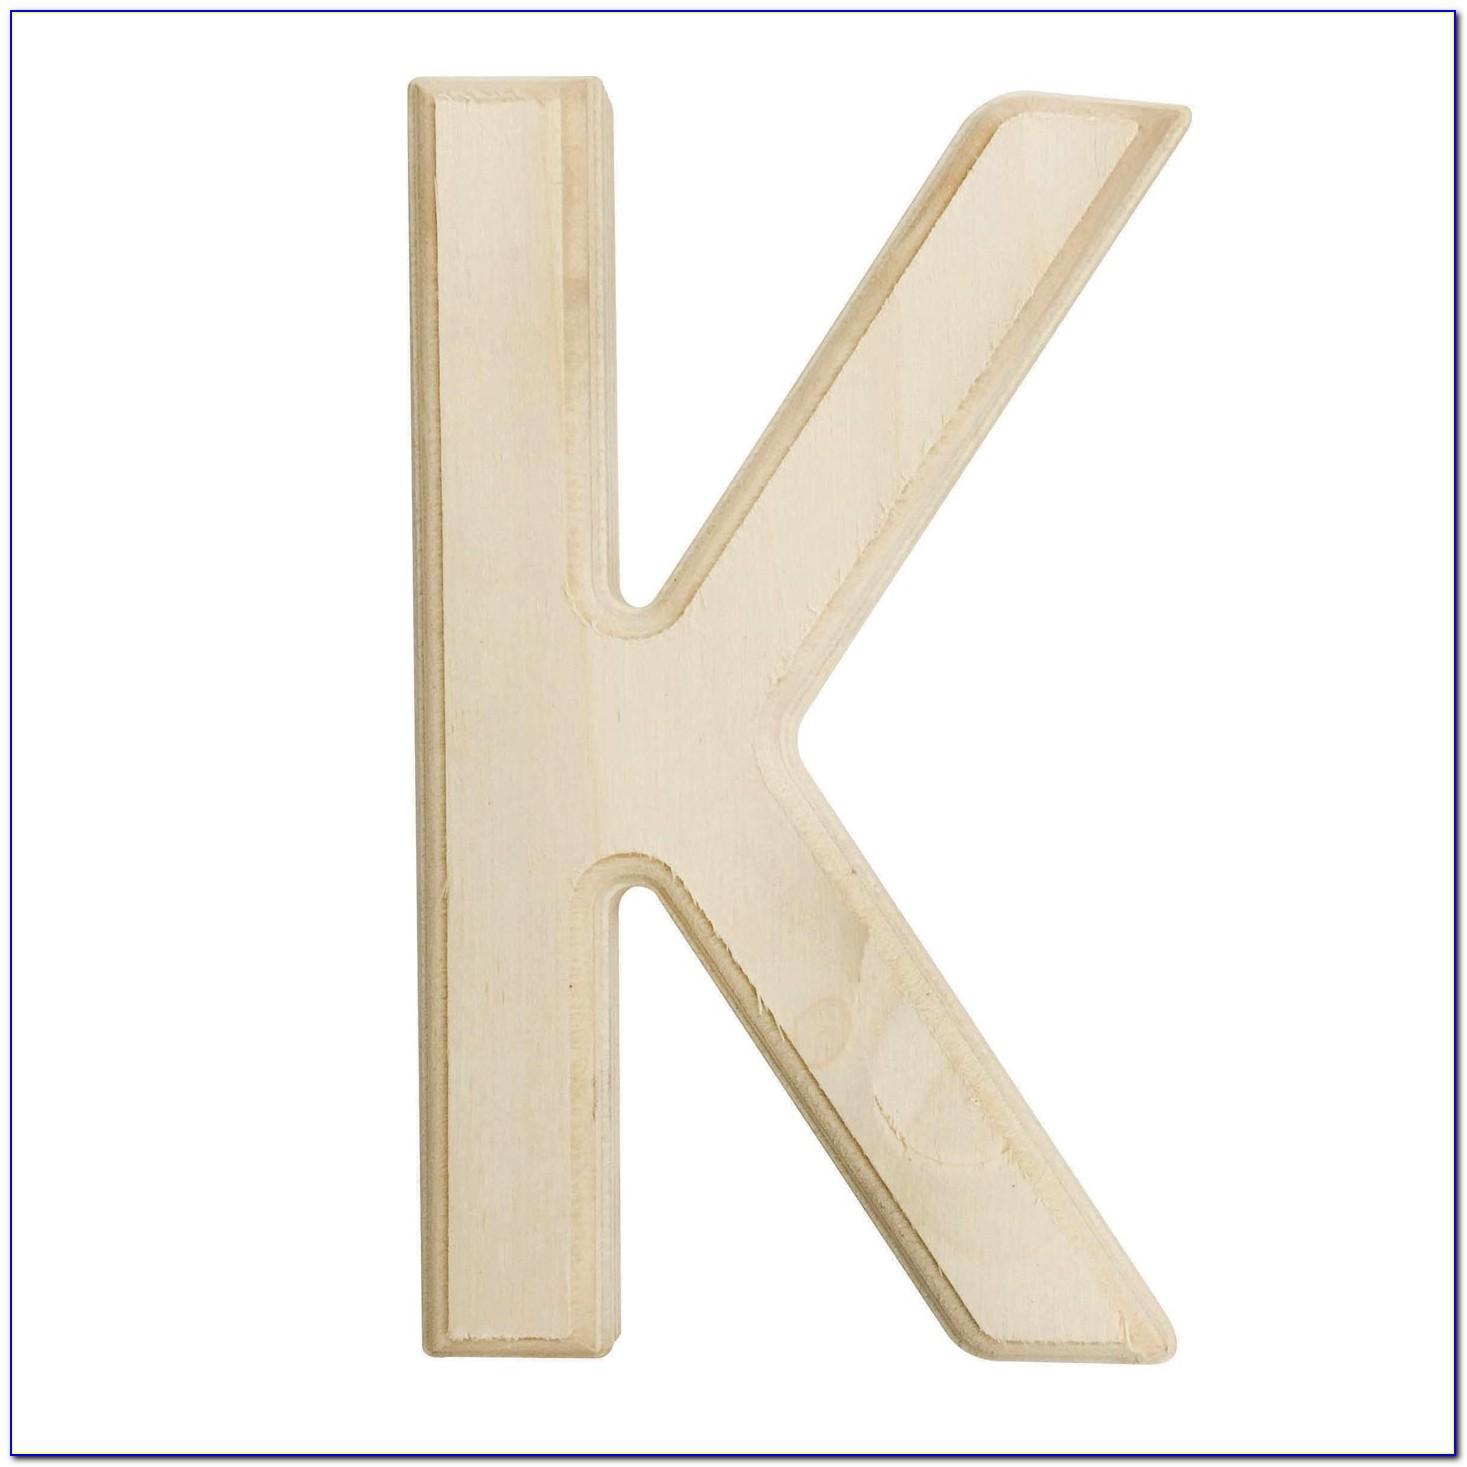 6 Inch Wooden Letters Amazon